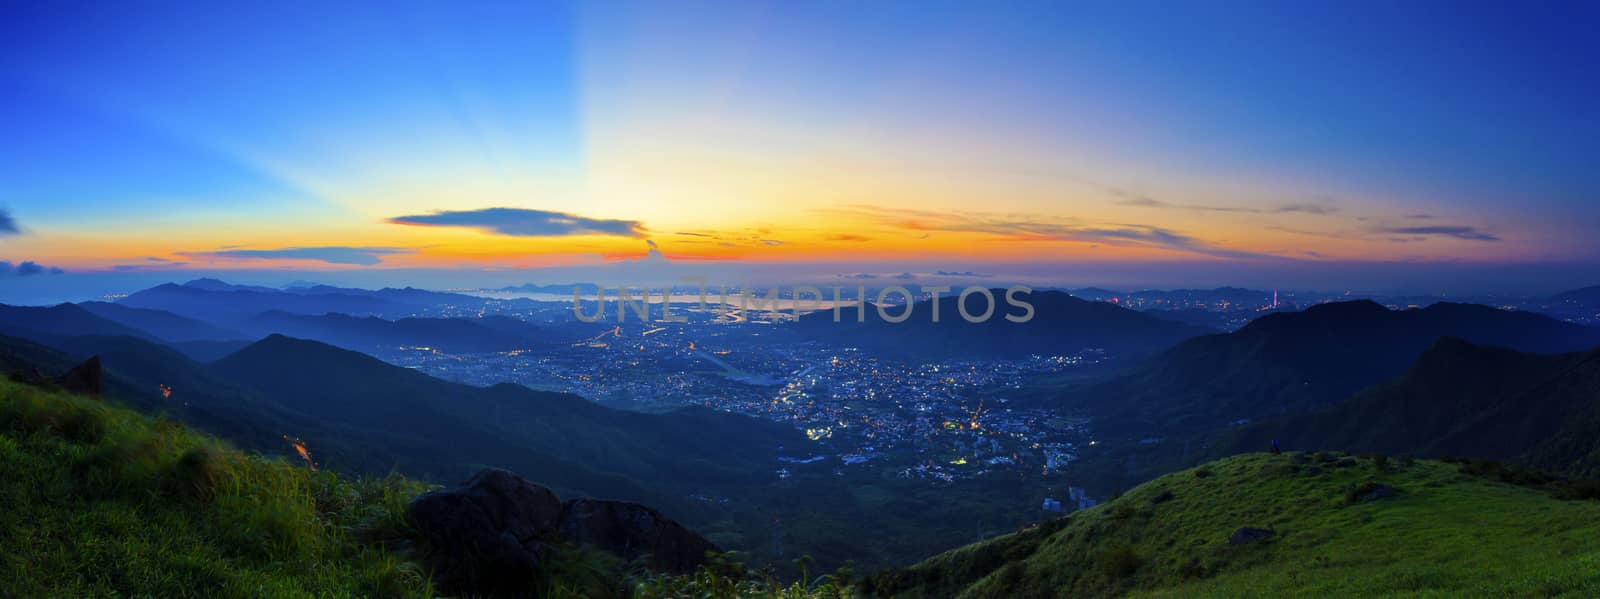 Majestic sunset in the mountains landscape by kawing921